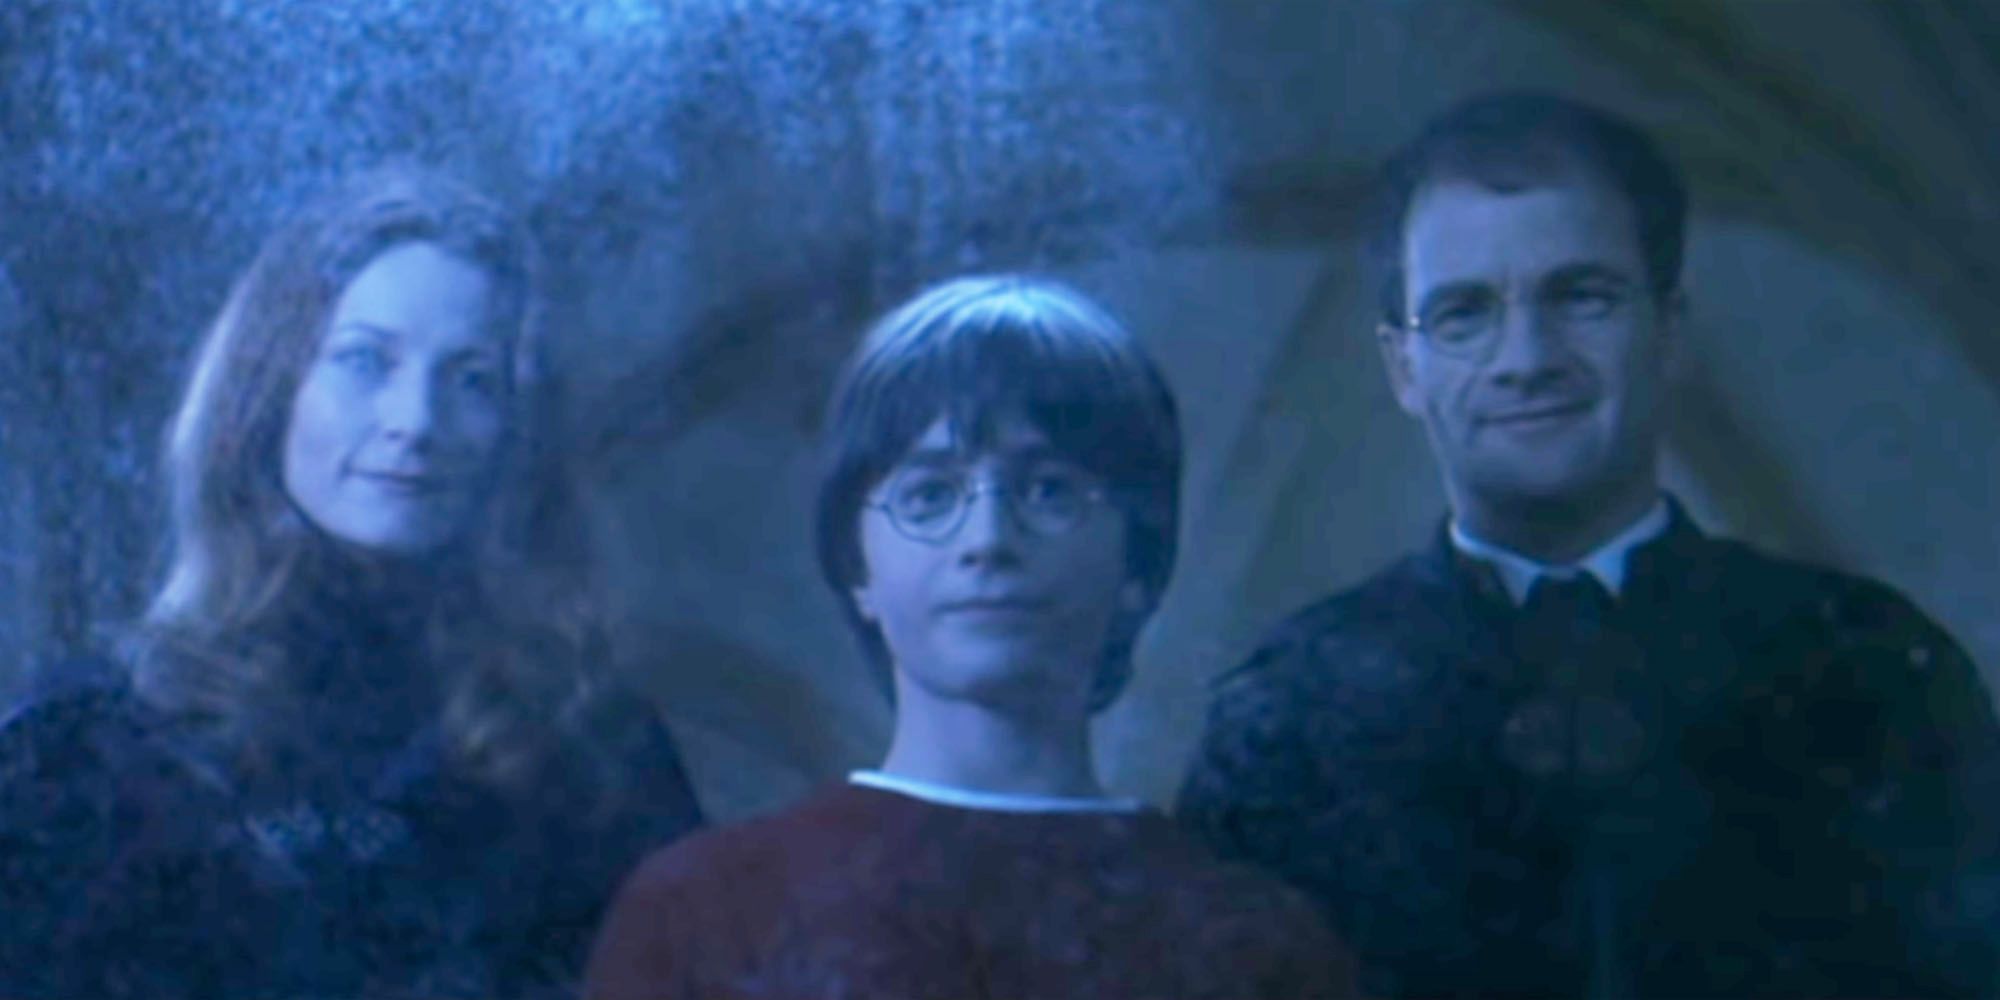 Mirror of Erised showing Harry Potter and his parents in the Sorcerer's Stone